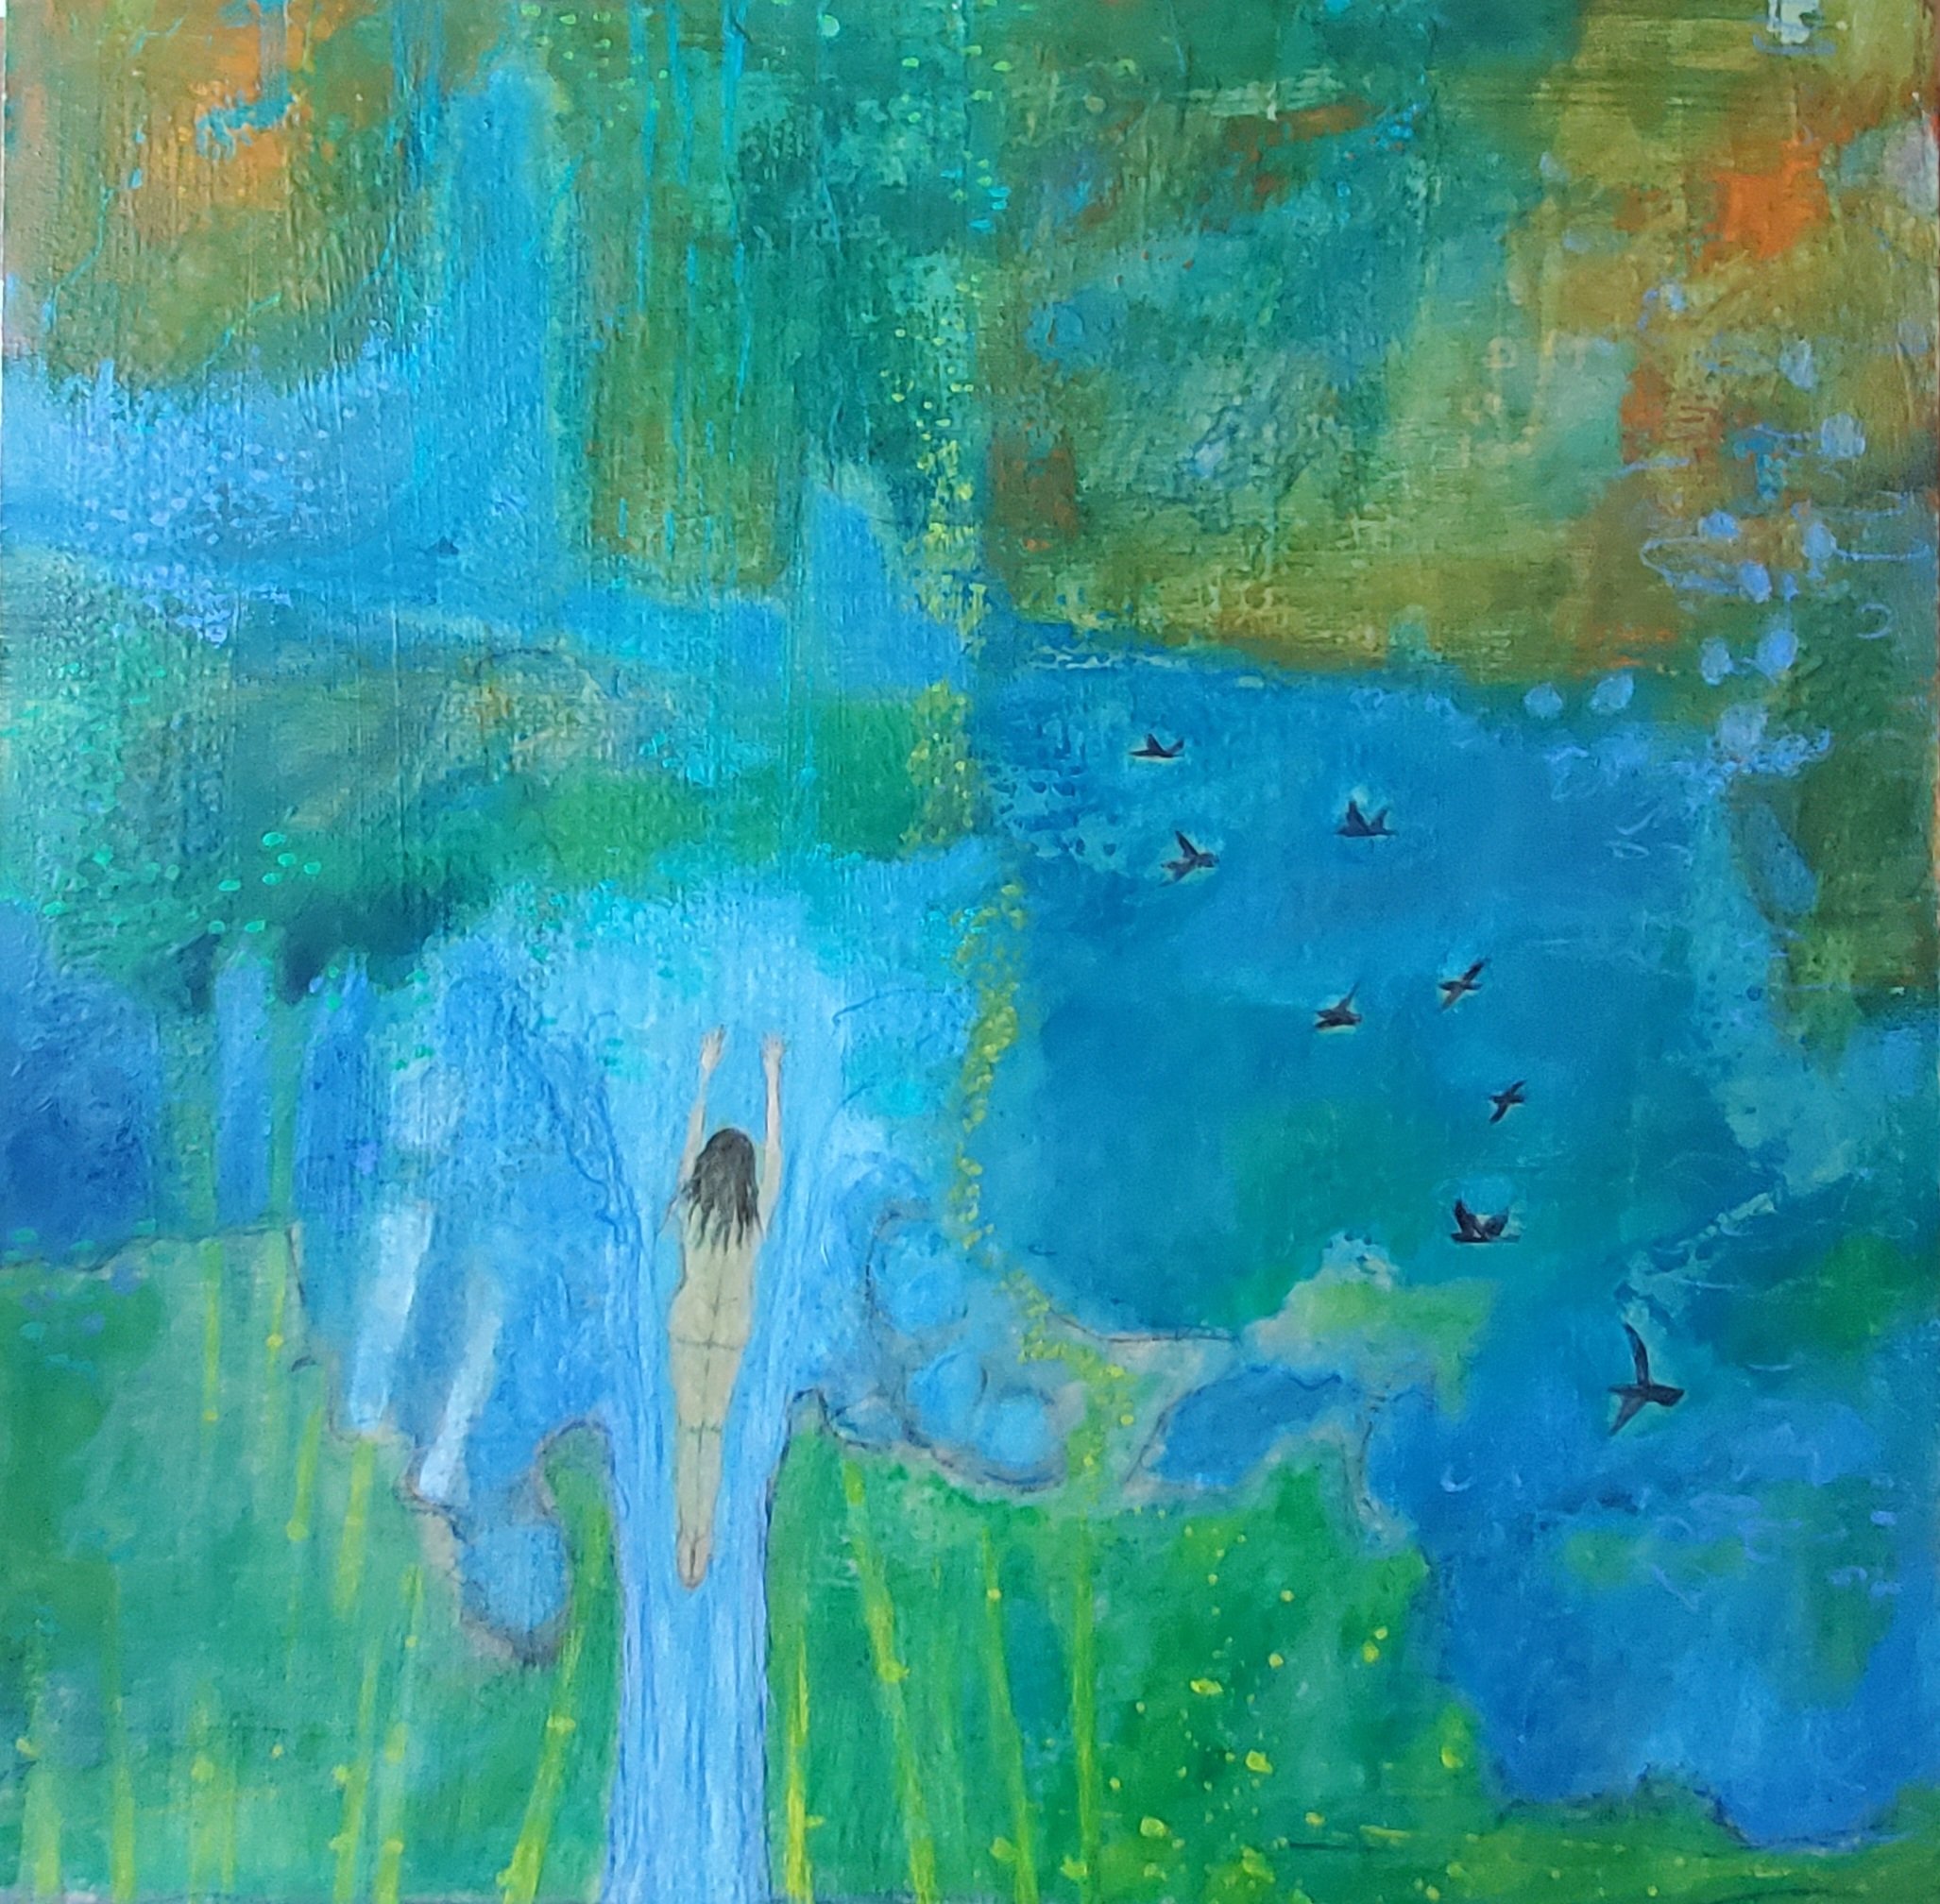 In the wake of a dream, girl, oil and hot wax on panel, 24x24, sold